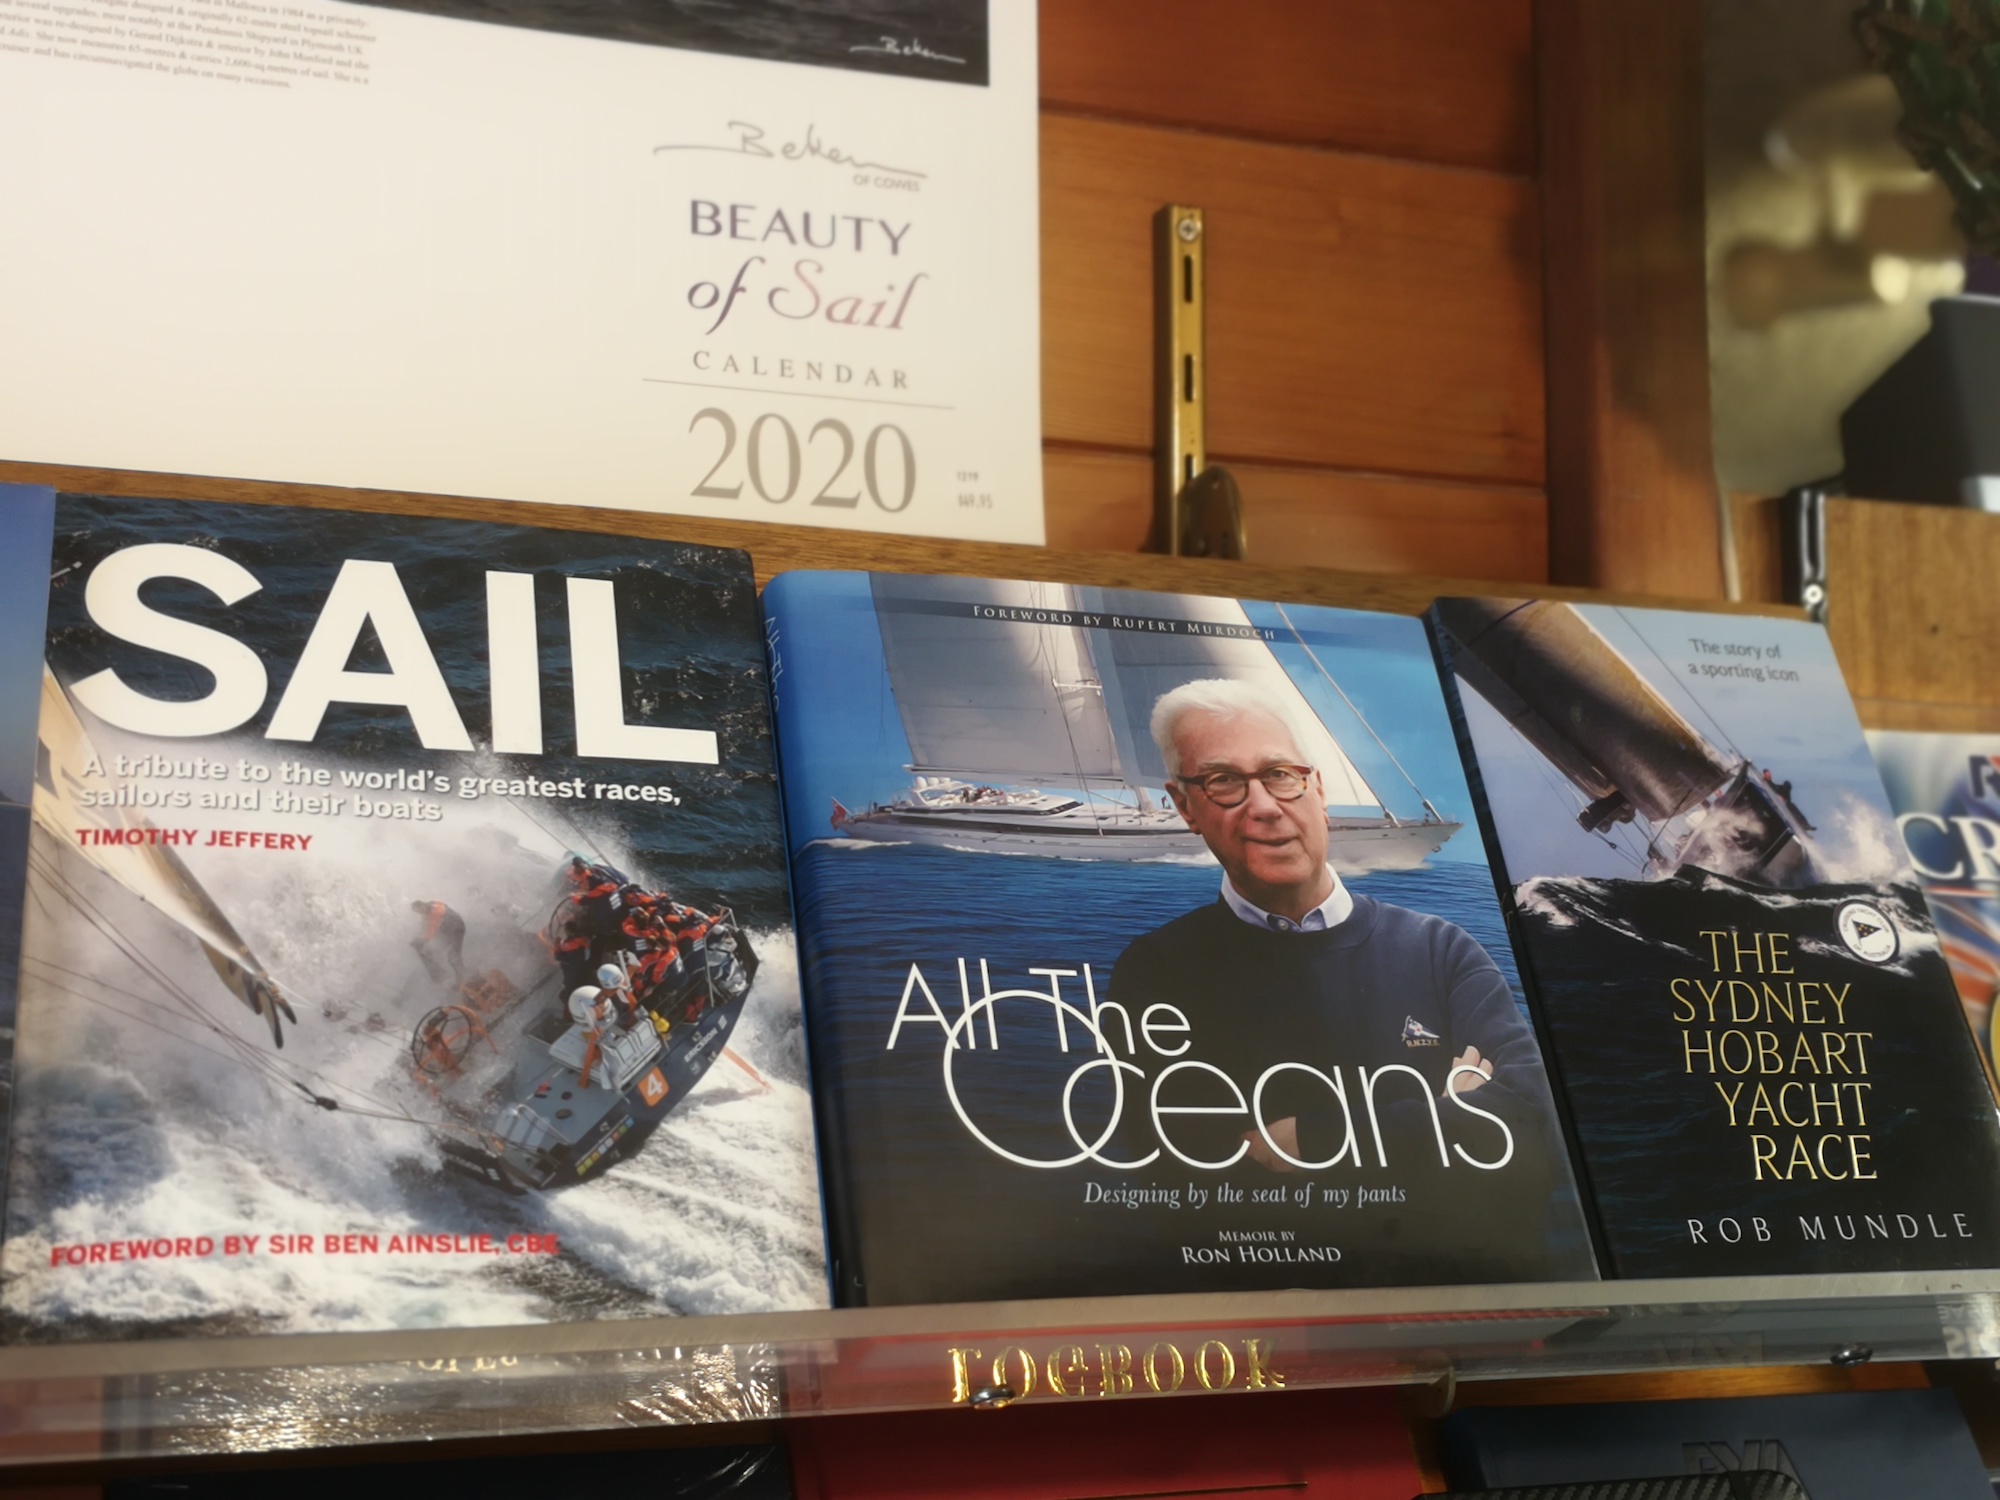 All the Oceans, Ron Holland's memoir displayed next to his author friends books at Sydney Australia Bookshop